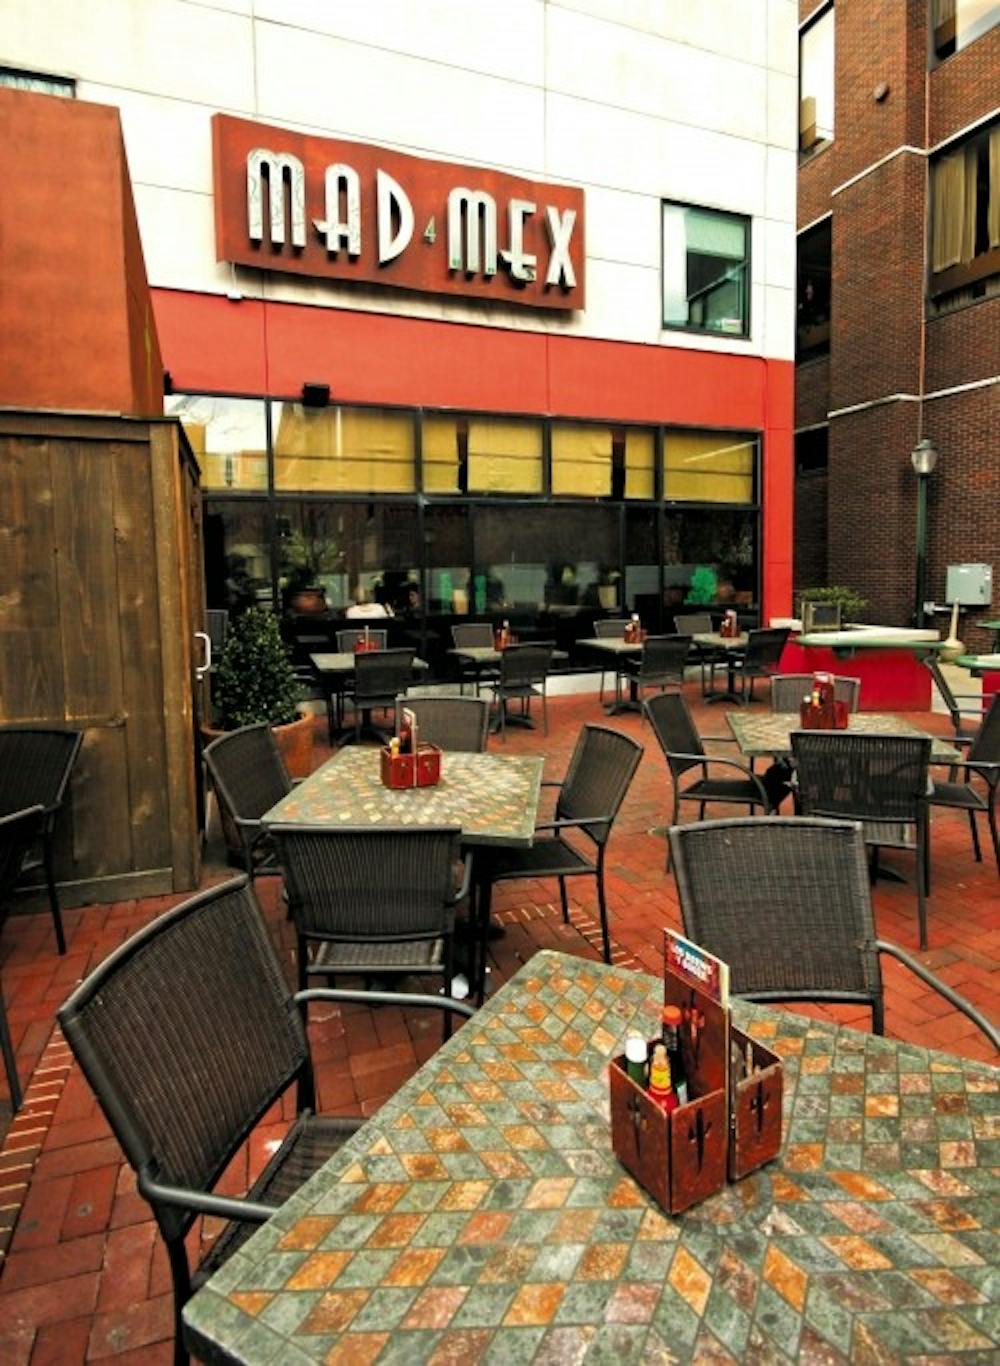 	An article in the Philadelphia Daily News claims that a Penn police officer unfairly favored an assistant district attorney who got into a fight at Mad Mex on Oct. 11. DPS said the incident was handled fairly. 